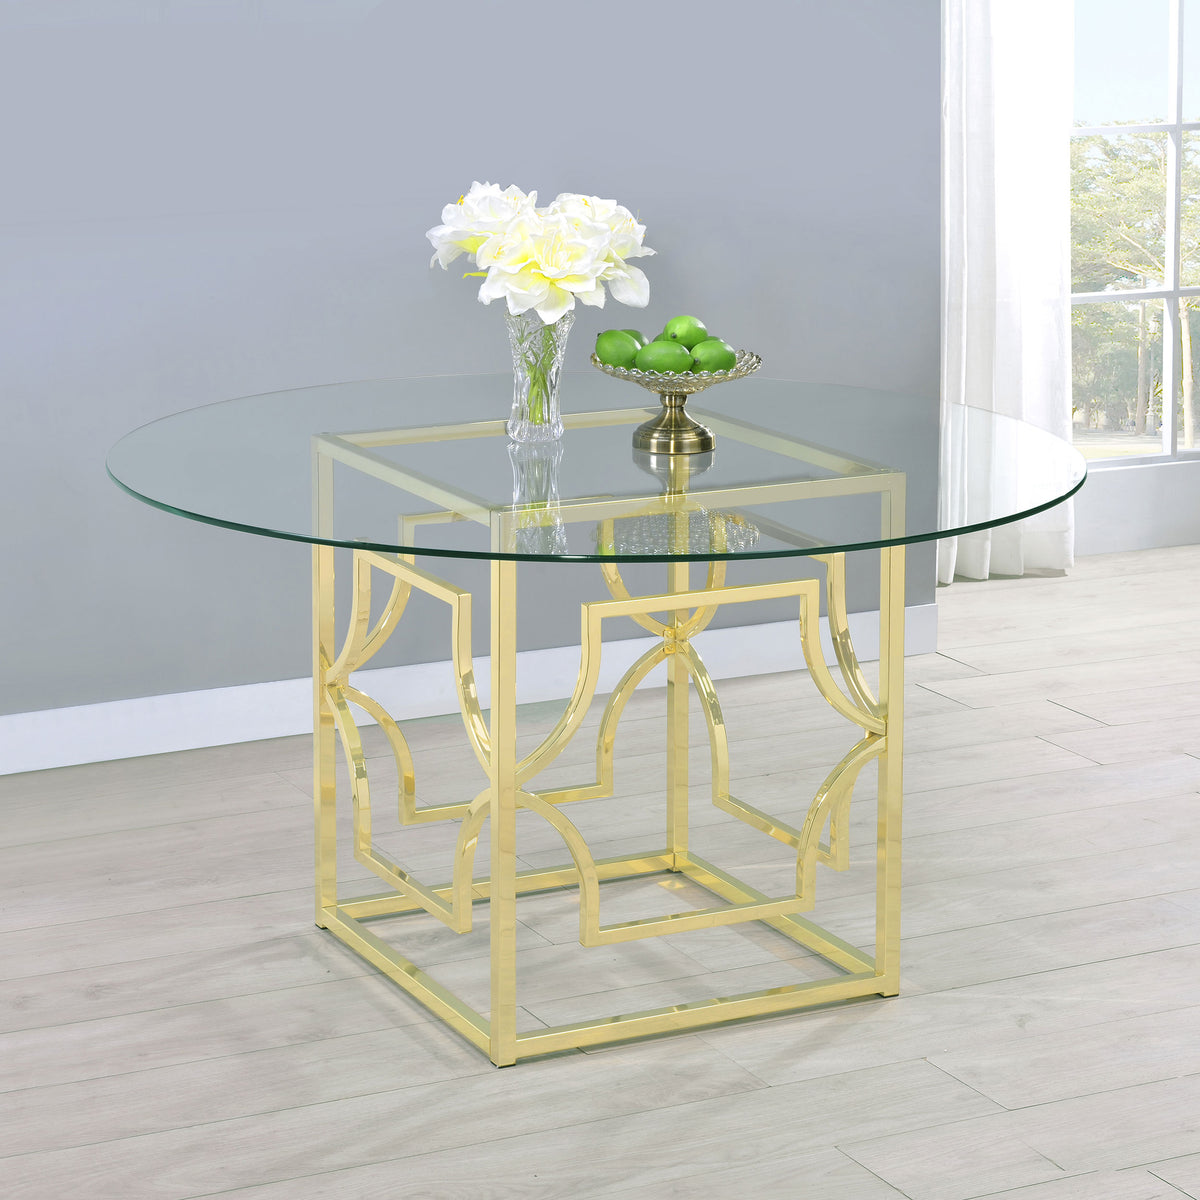 Starlight Round Glass Top Dining Table - Half Price Furniture